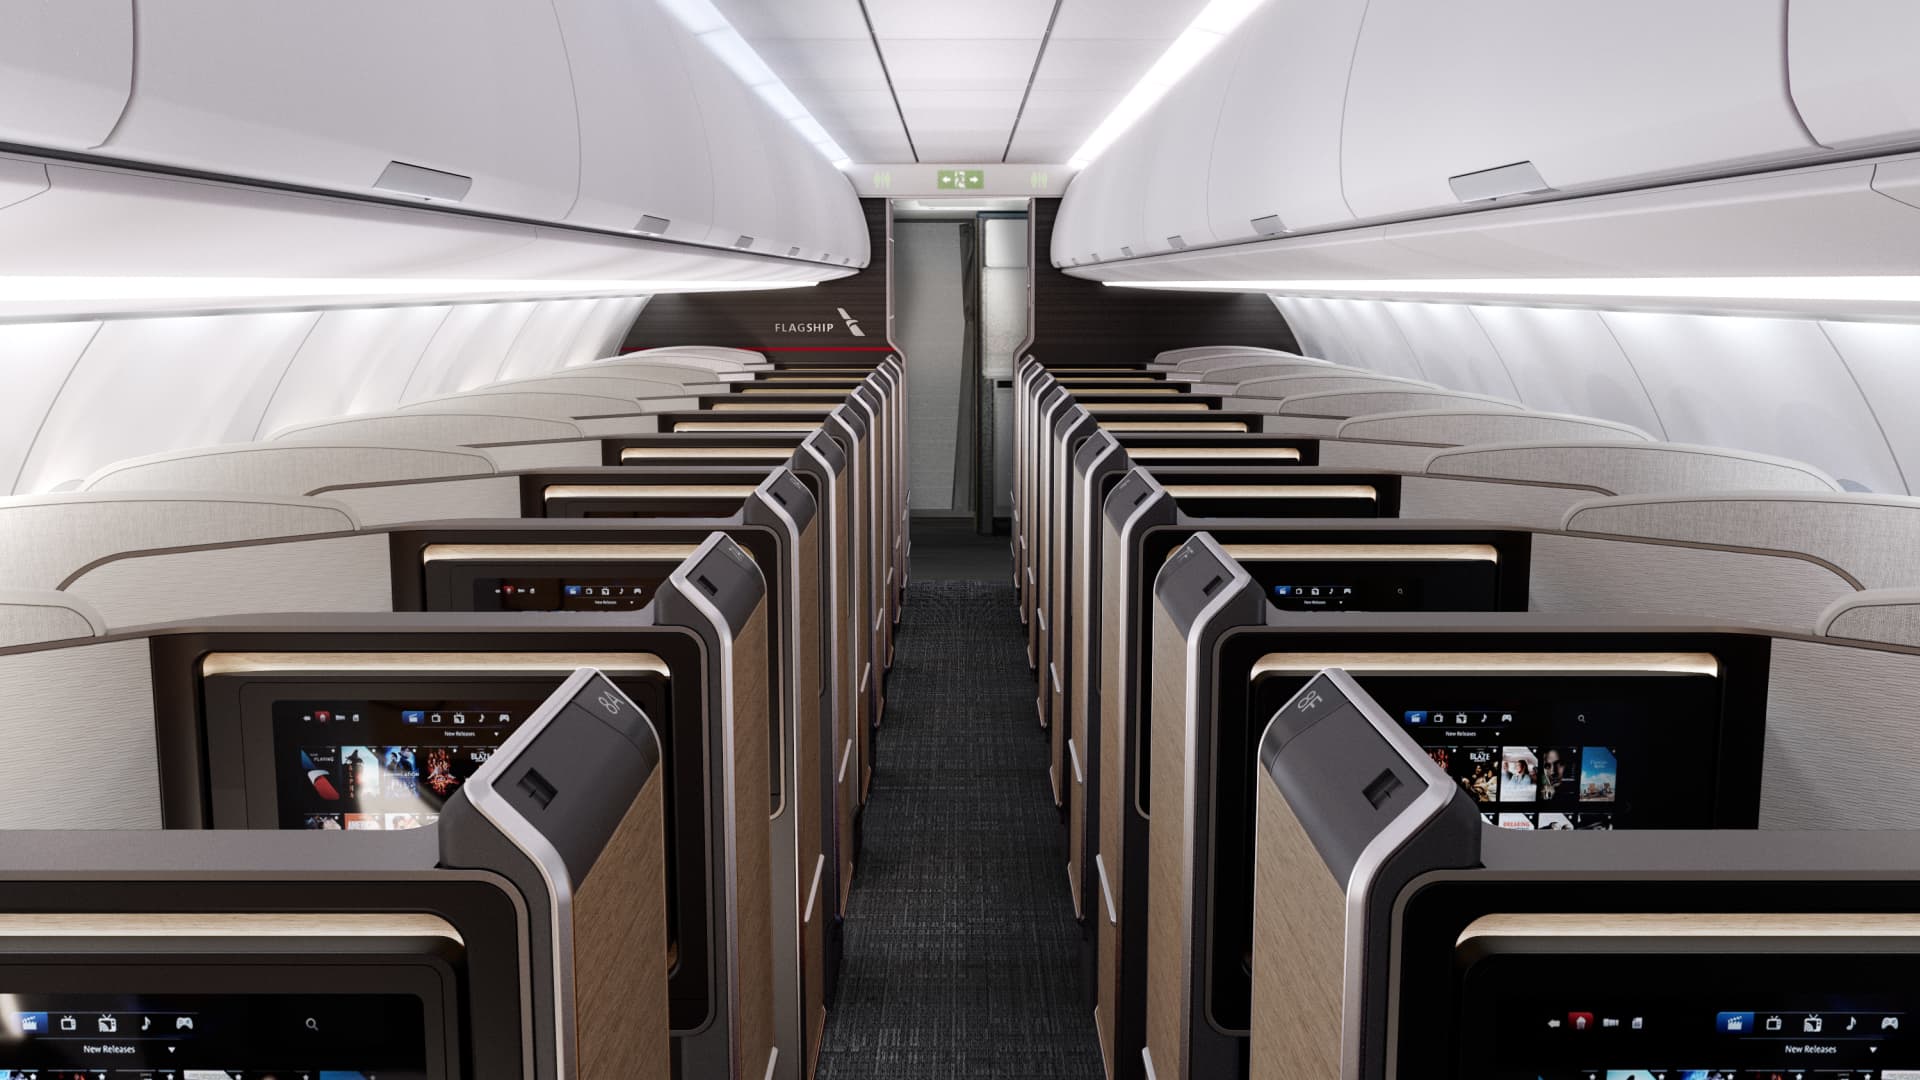 Rows of American Airlines' new Flagship Suites